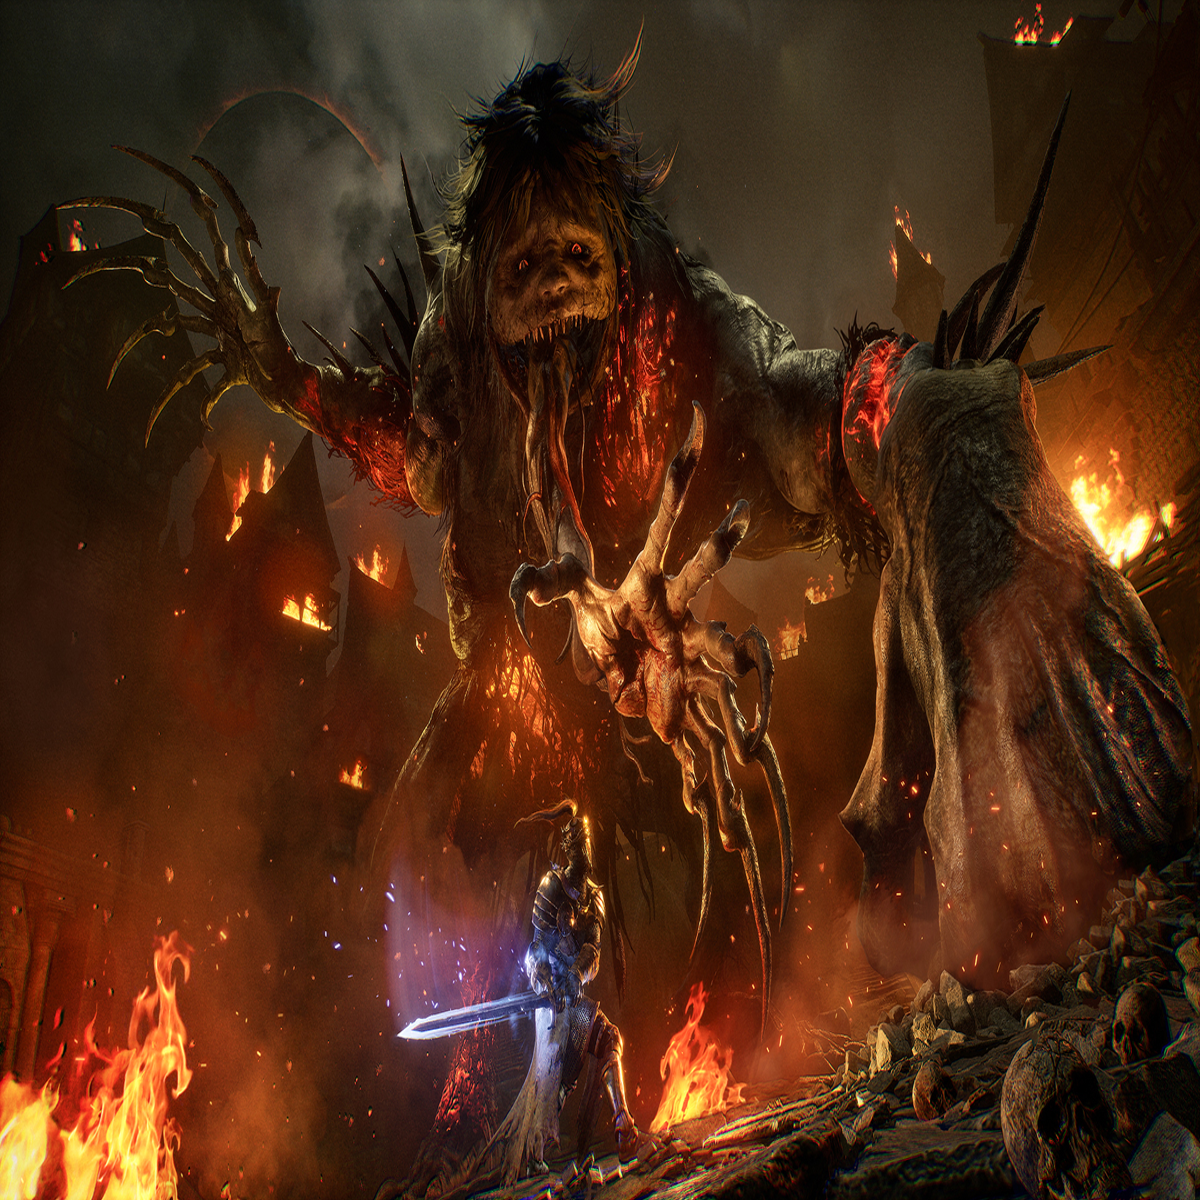 New Lords of the Fallen gameplay footage debuted